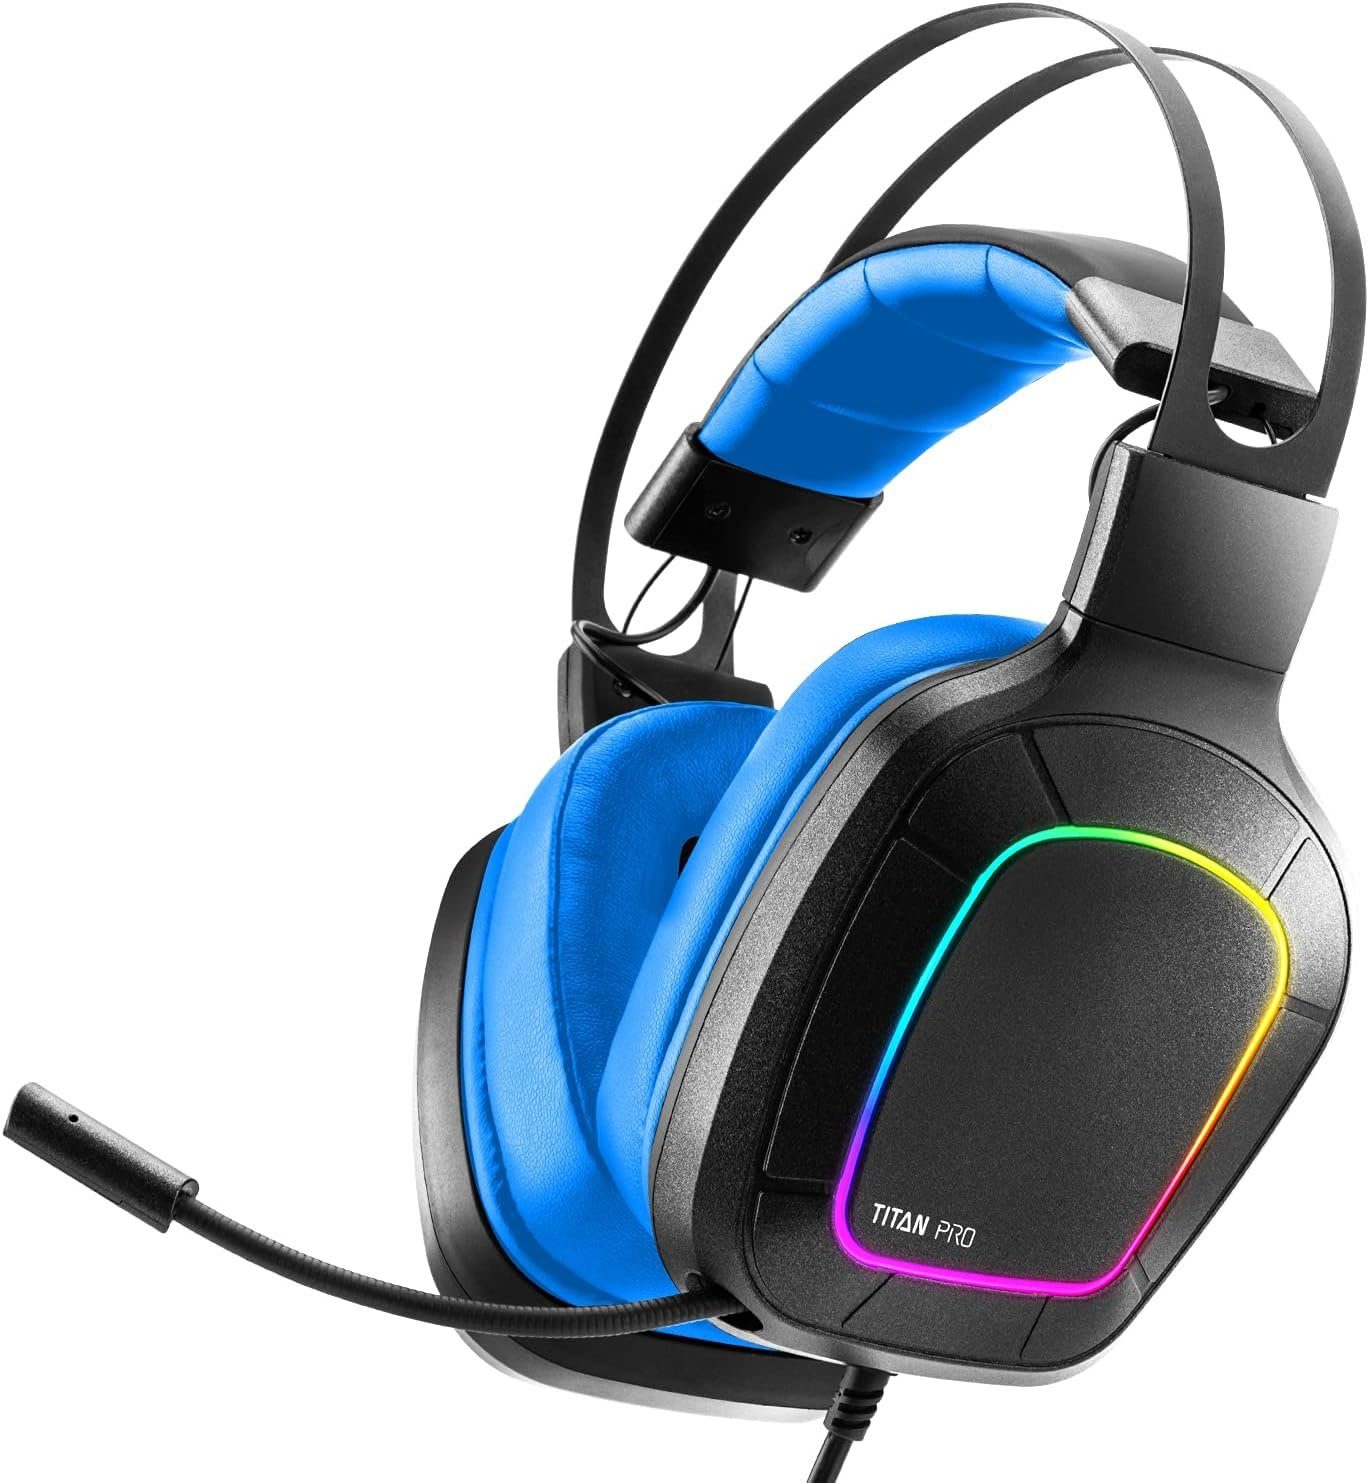 NITHO Gaming-Headset (Over Ear Gaming Headset mit Hochklappbares Mikrofon, USB Head-Set, Gaming headset mit hochklappbares mikrofon treibern für pc ps4 ps5)